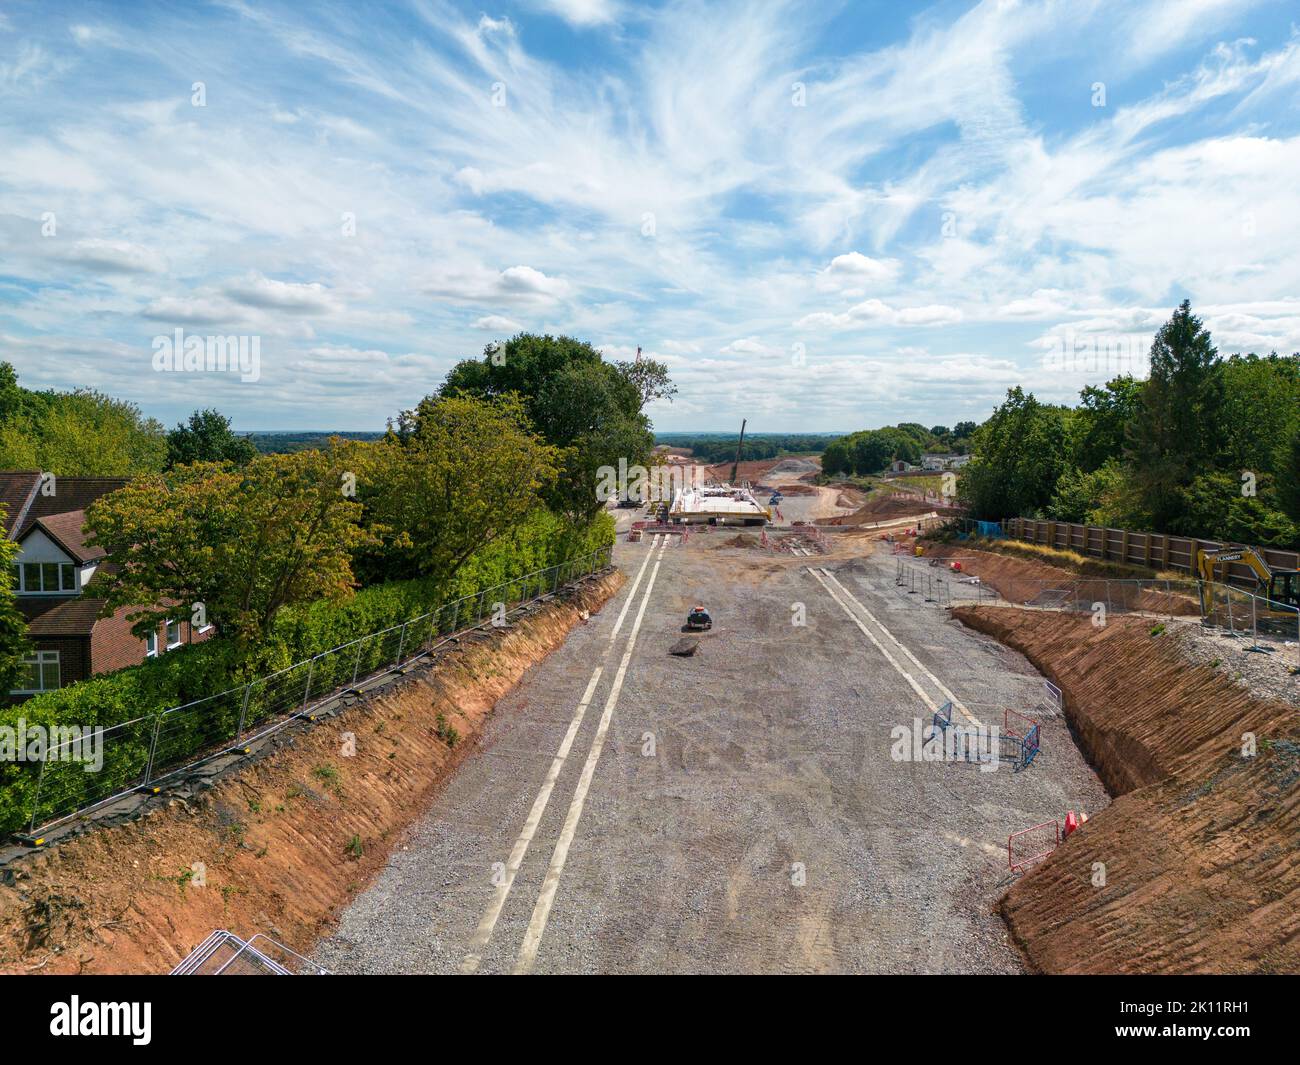 The section of the HS2 rail network being built near Burton Green in Warwickshire. The line goes through the centre of Burton Green, going under Cromwell Lane via a tunnel. The tunnel is called a cut and shut, constructed by making the sides and then adding a top covering layer to form the tunnel. Picture shows the view from Cromwell Lane looking towards Kenilworth after part of the tunnel construction has been completed. Stock Photo